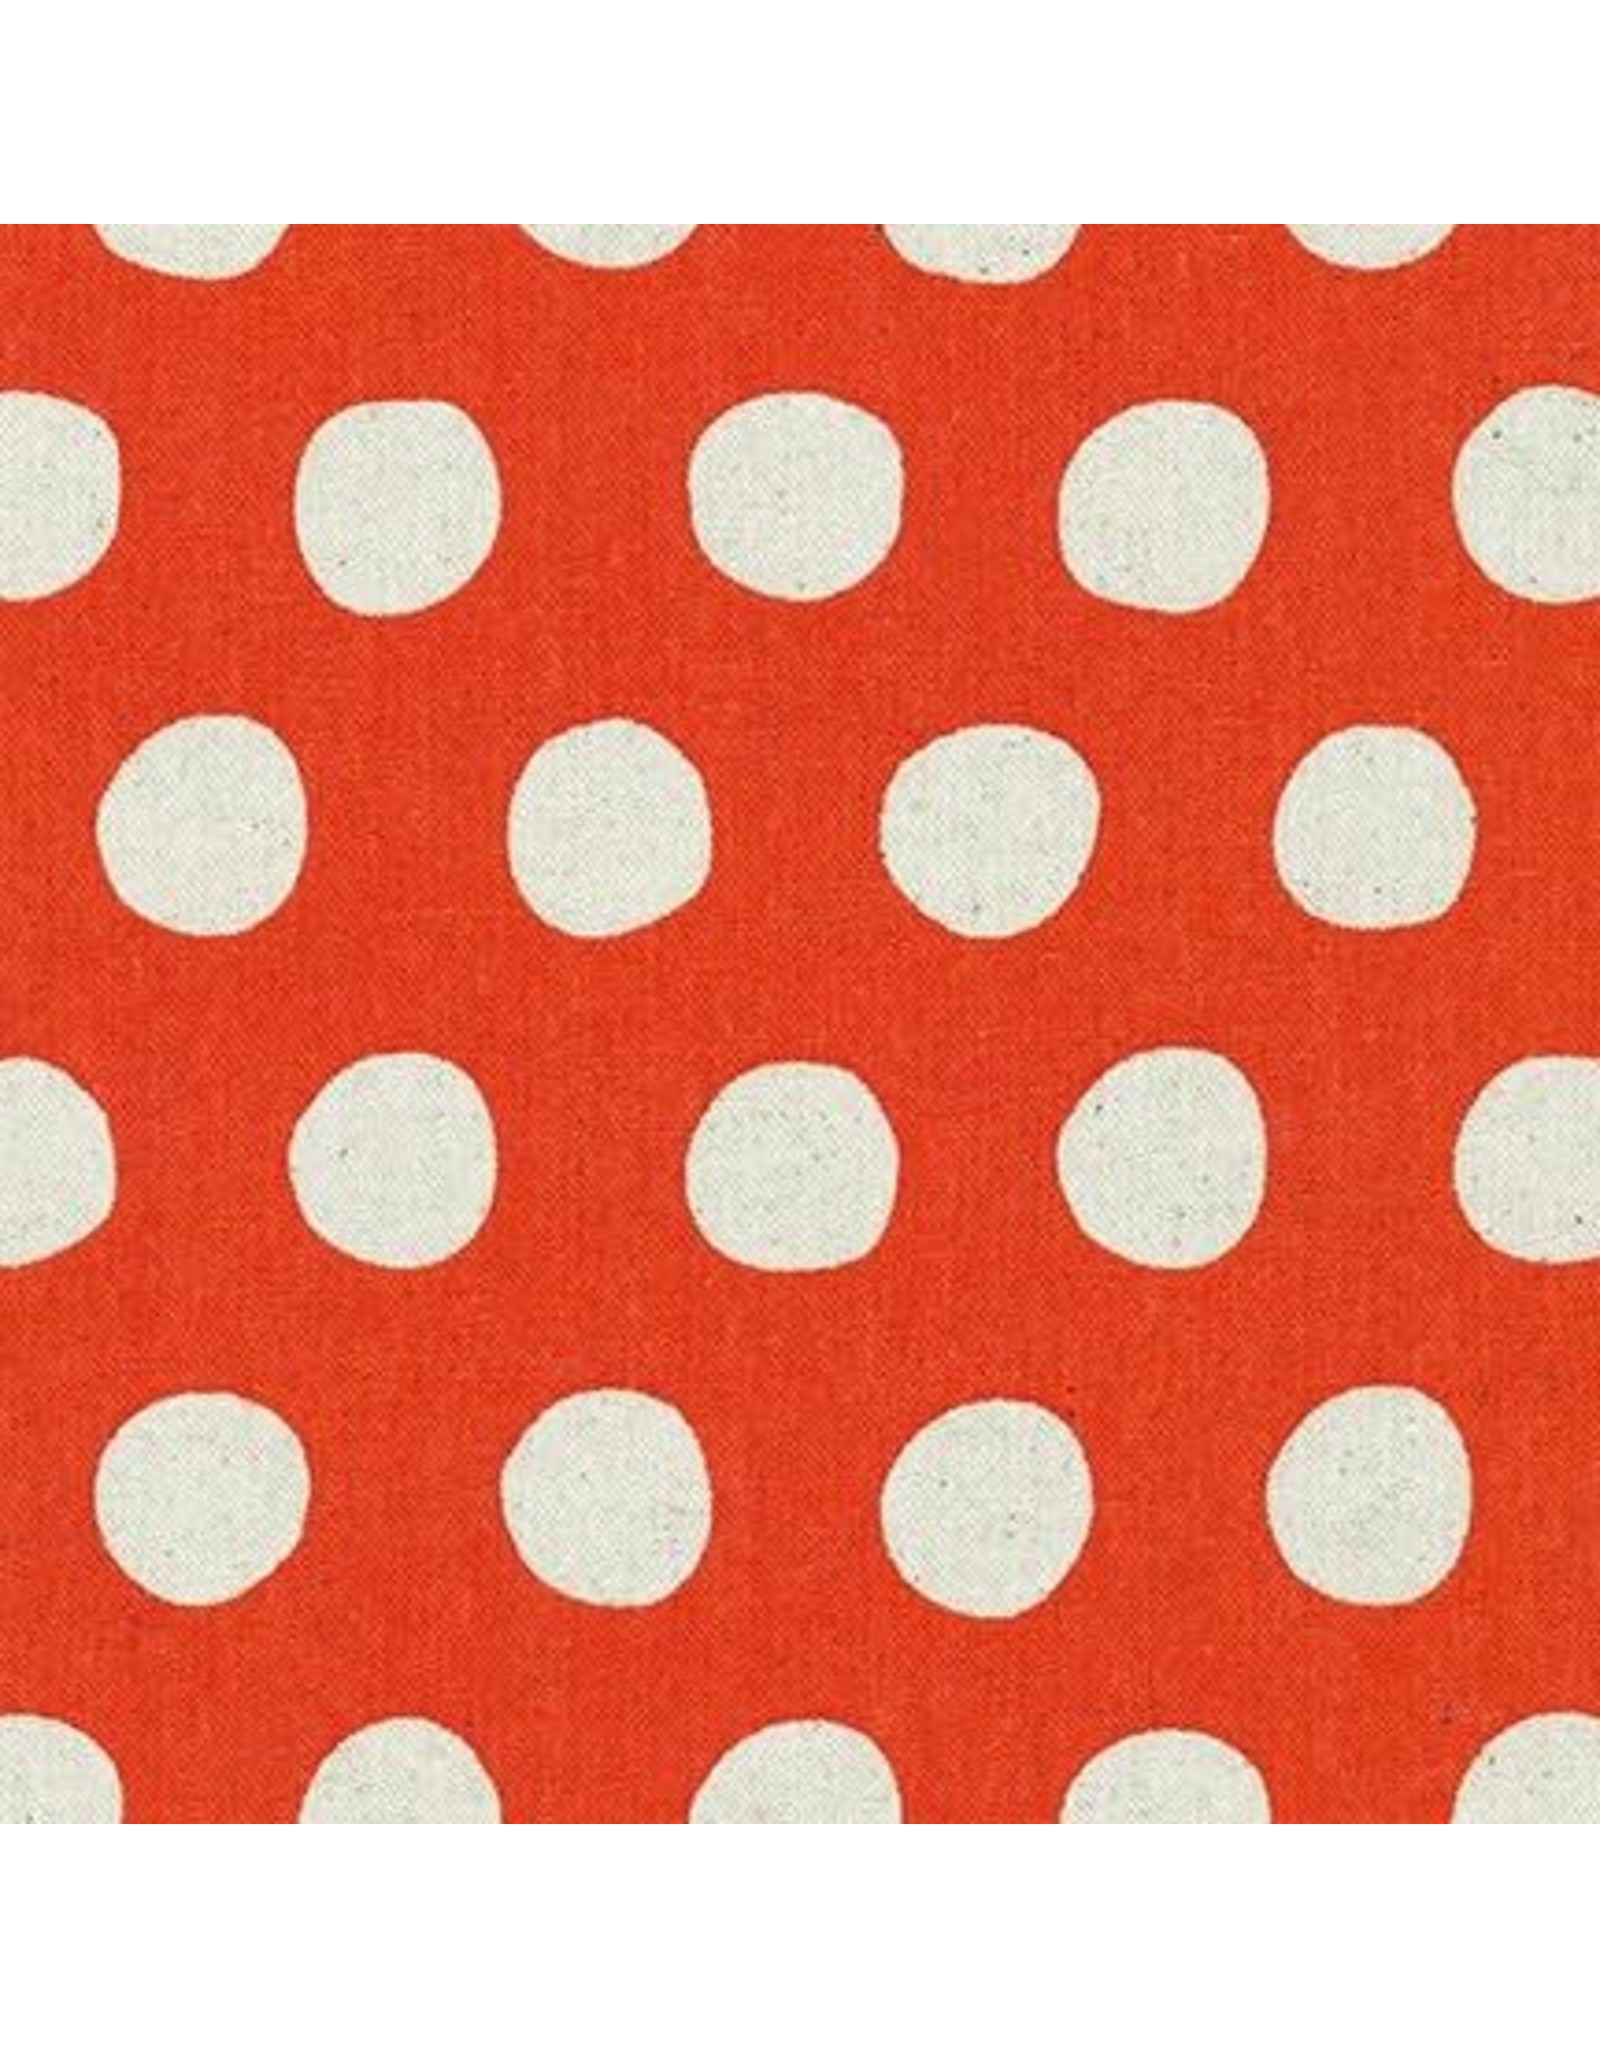 Sevenberry Canvas, Sevenberry Natural Dots in Orange, Fabric Half-Yards SB-88187D1-9